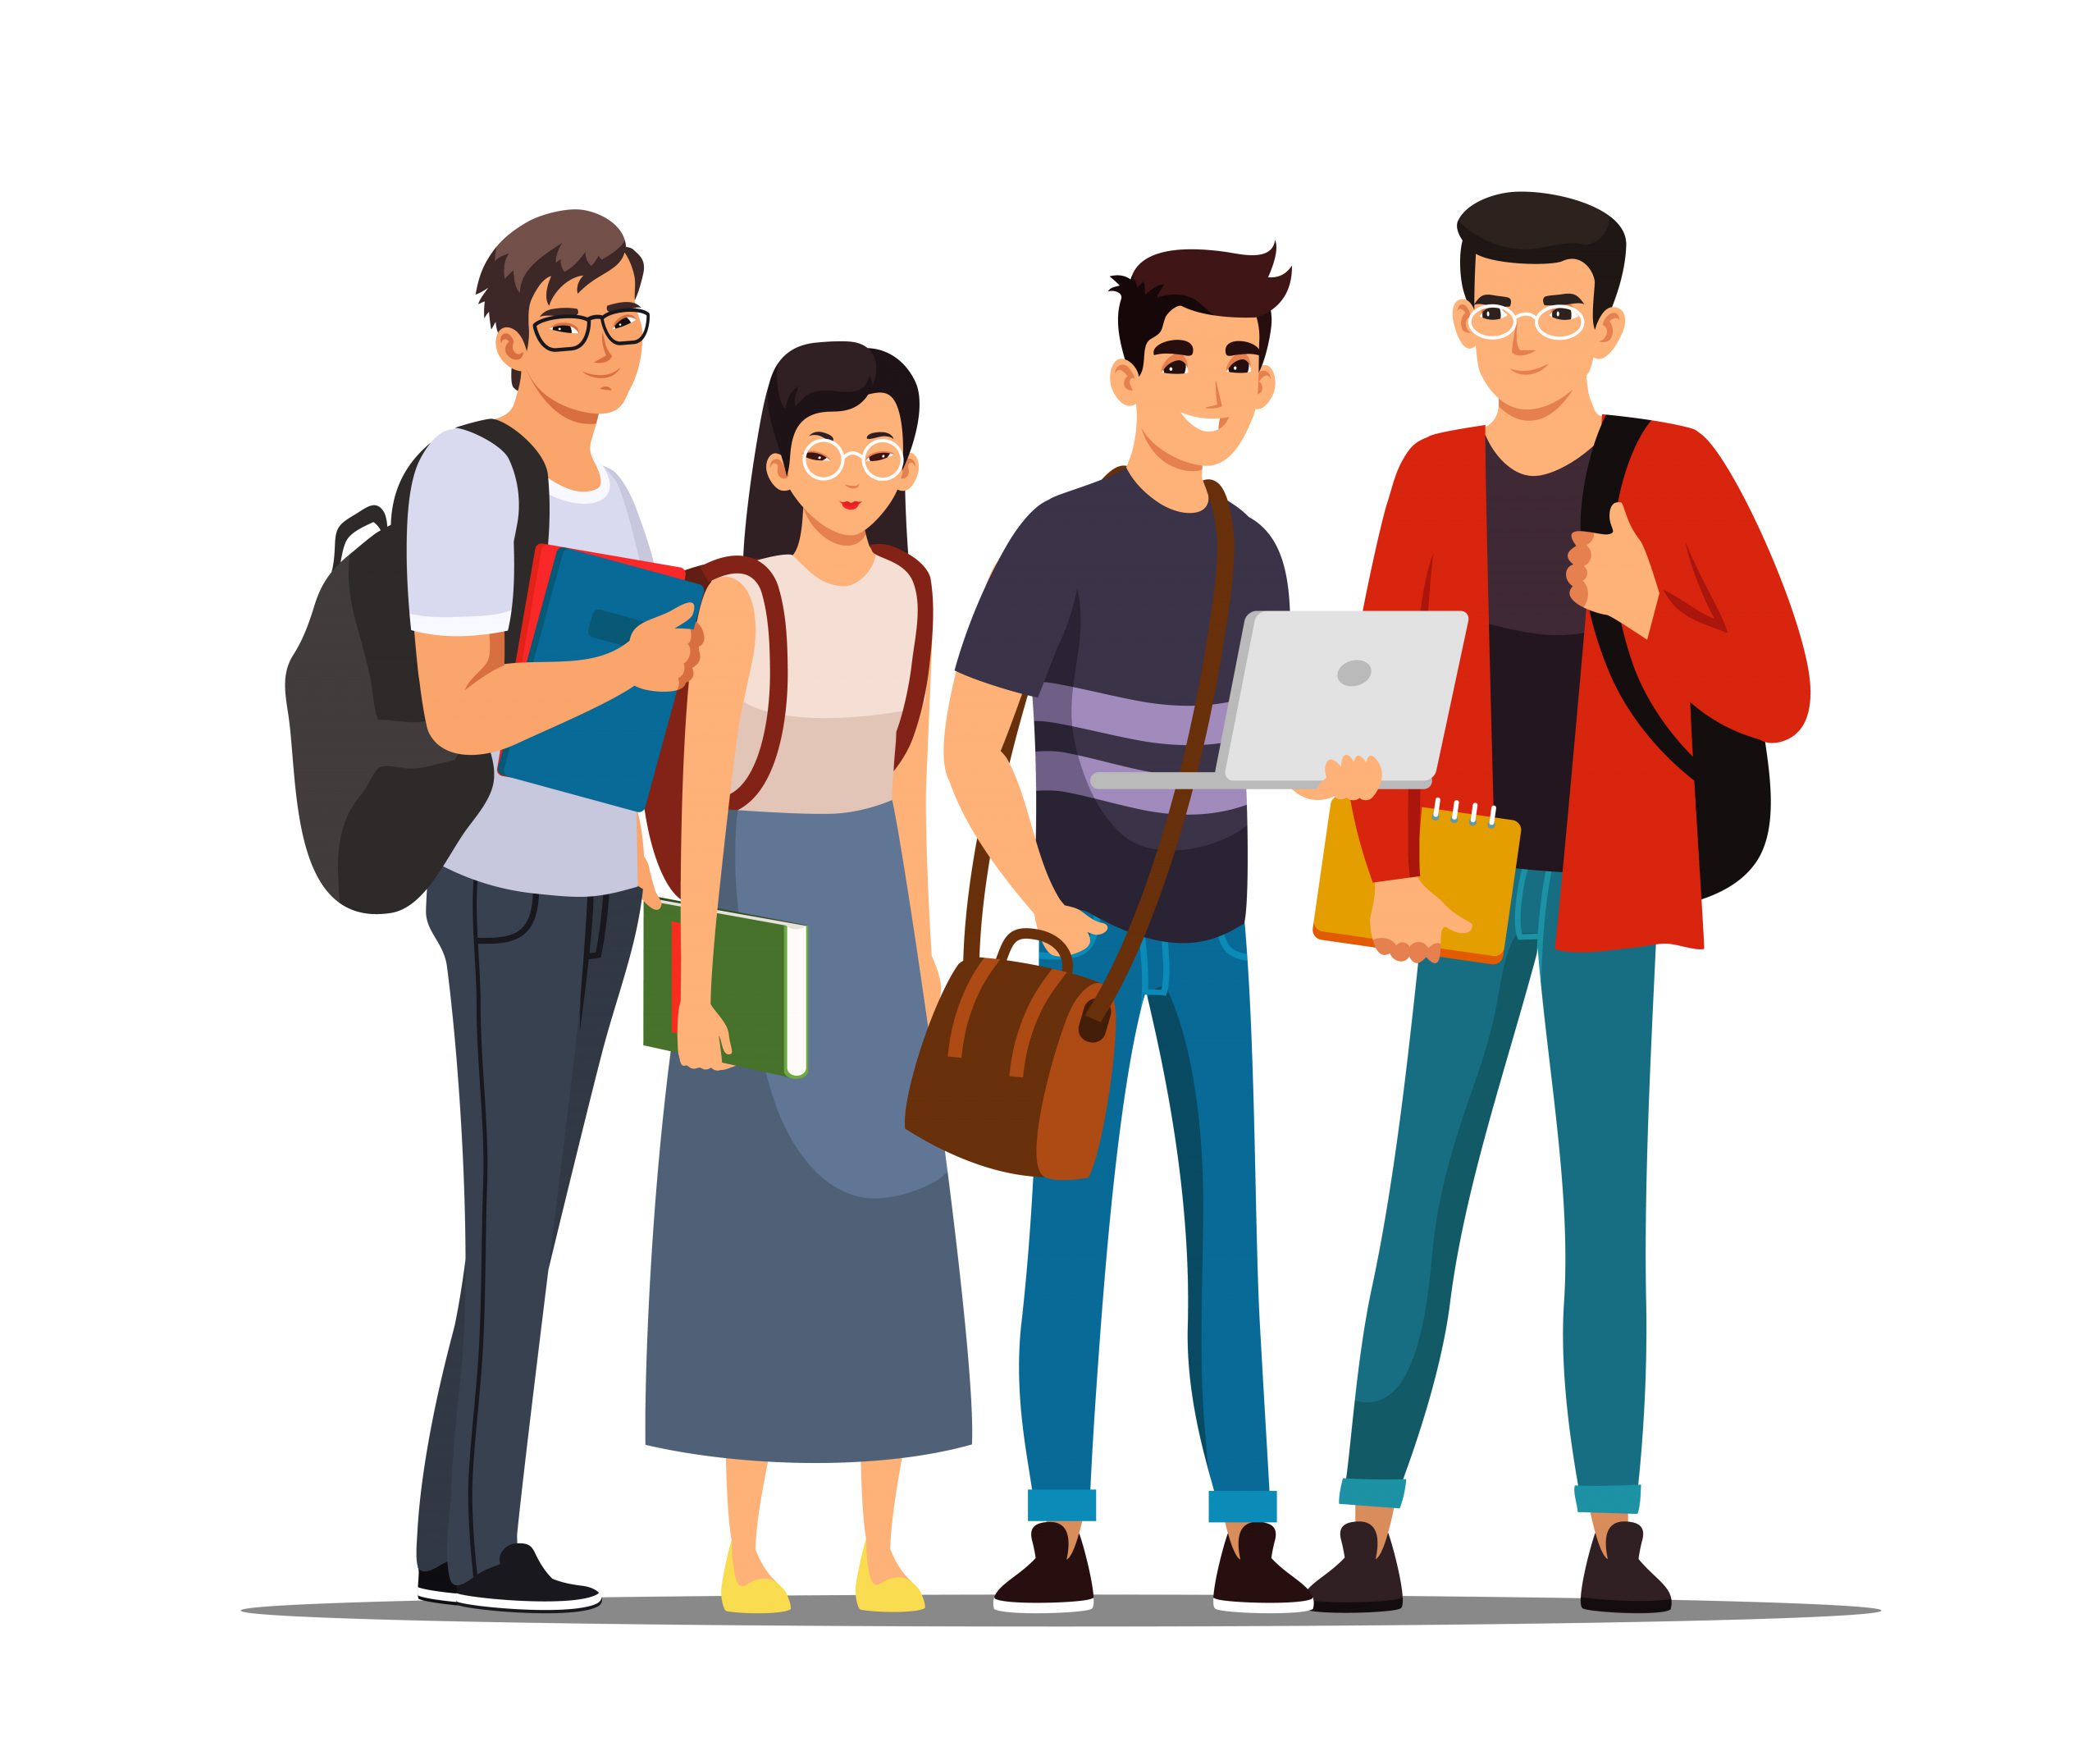 College or university students group. Young happy people standing isolated on white background. Higher academic education vector illustration. Diverse multicultural meeting.